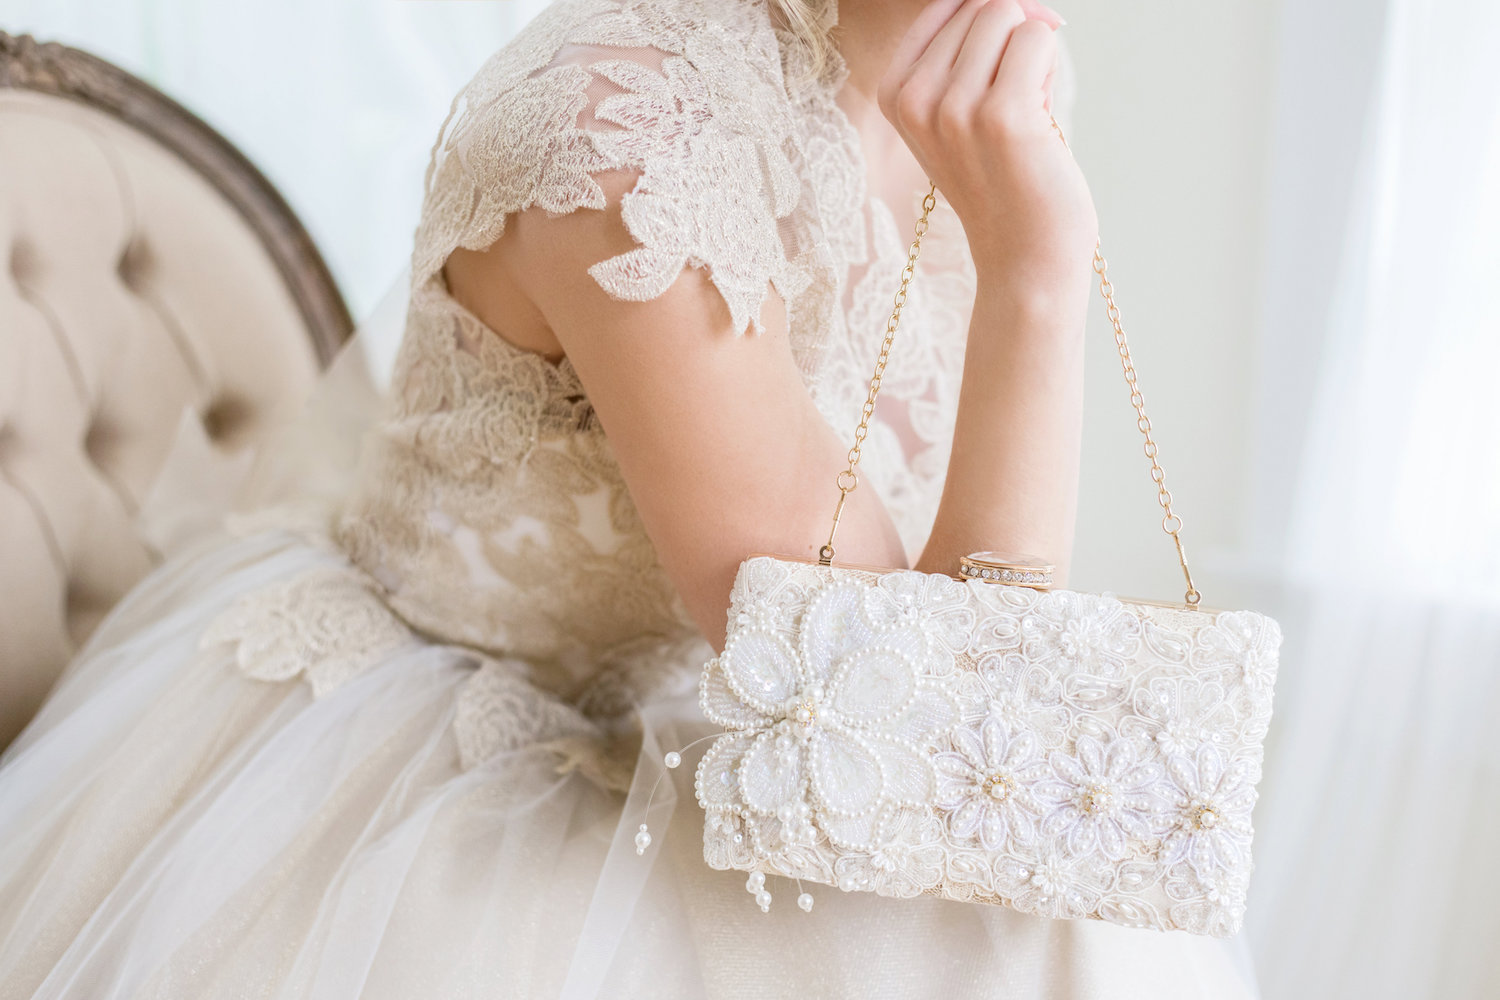 Fashionable Gown Beautiful Model Bride And Accessories Concept White  Wedding Dress With Embroidery Flowers Embellished With Rhinestones And  Pearls Hand Of Slender Woman On The Waist Stock Photo  Download Image Now 